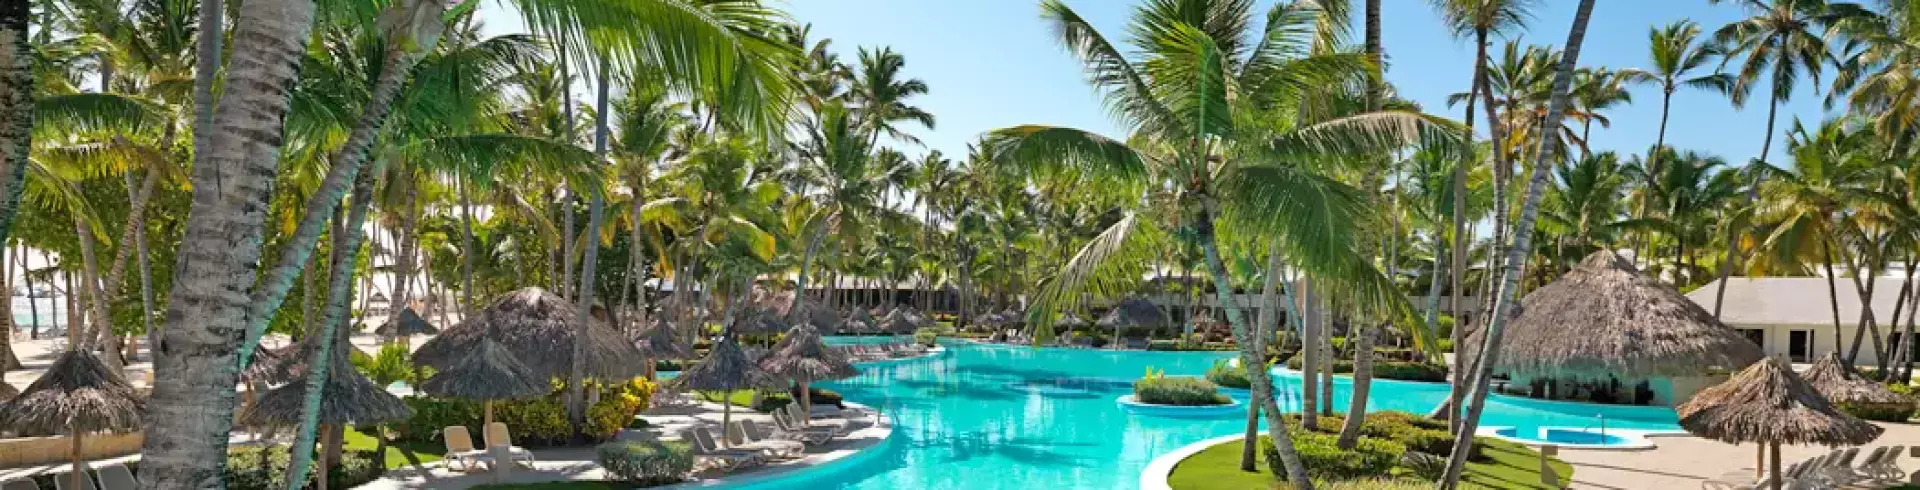 MELIA PUNTA CANA BEACH - A WELLNESS INCLUSIVE RESORT FOR ADULTS ONLY